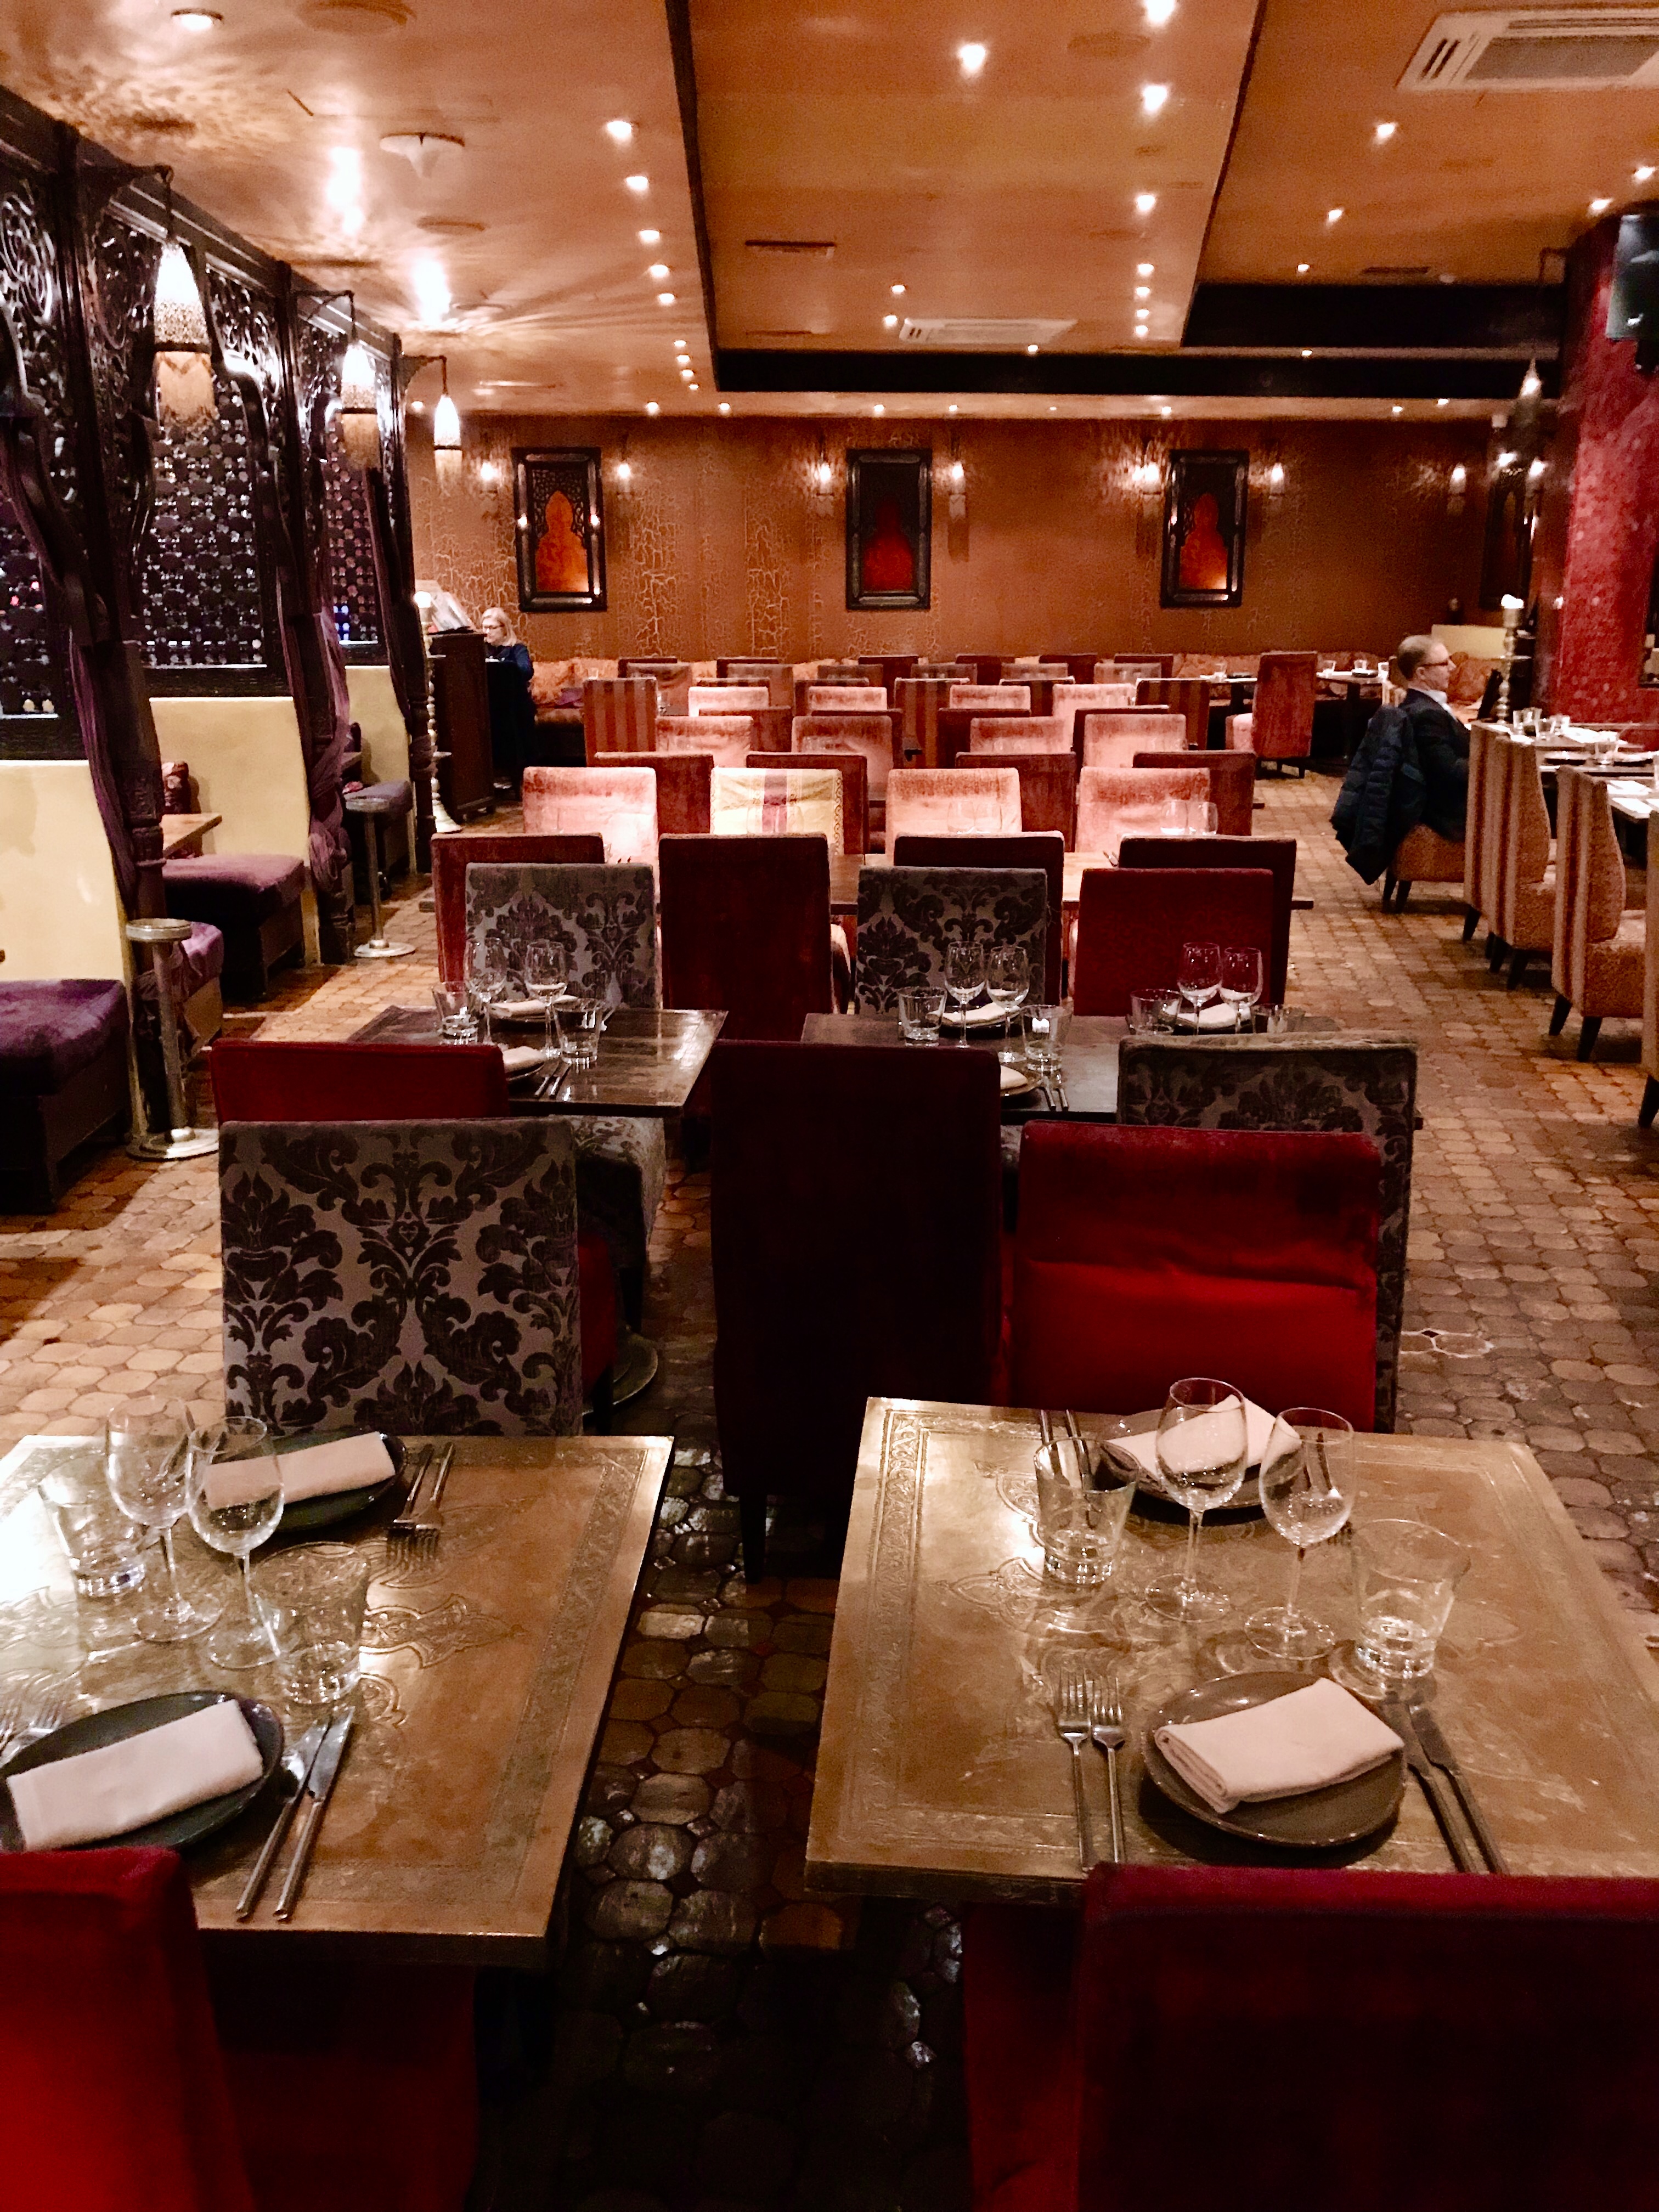 KENZA RESTAURANT AND LOUNGE IN LONDON Authentic home-style Lebanese and Middle-eastern cuisine